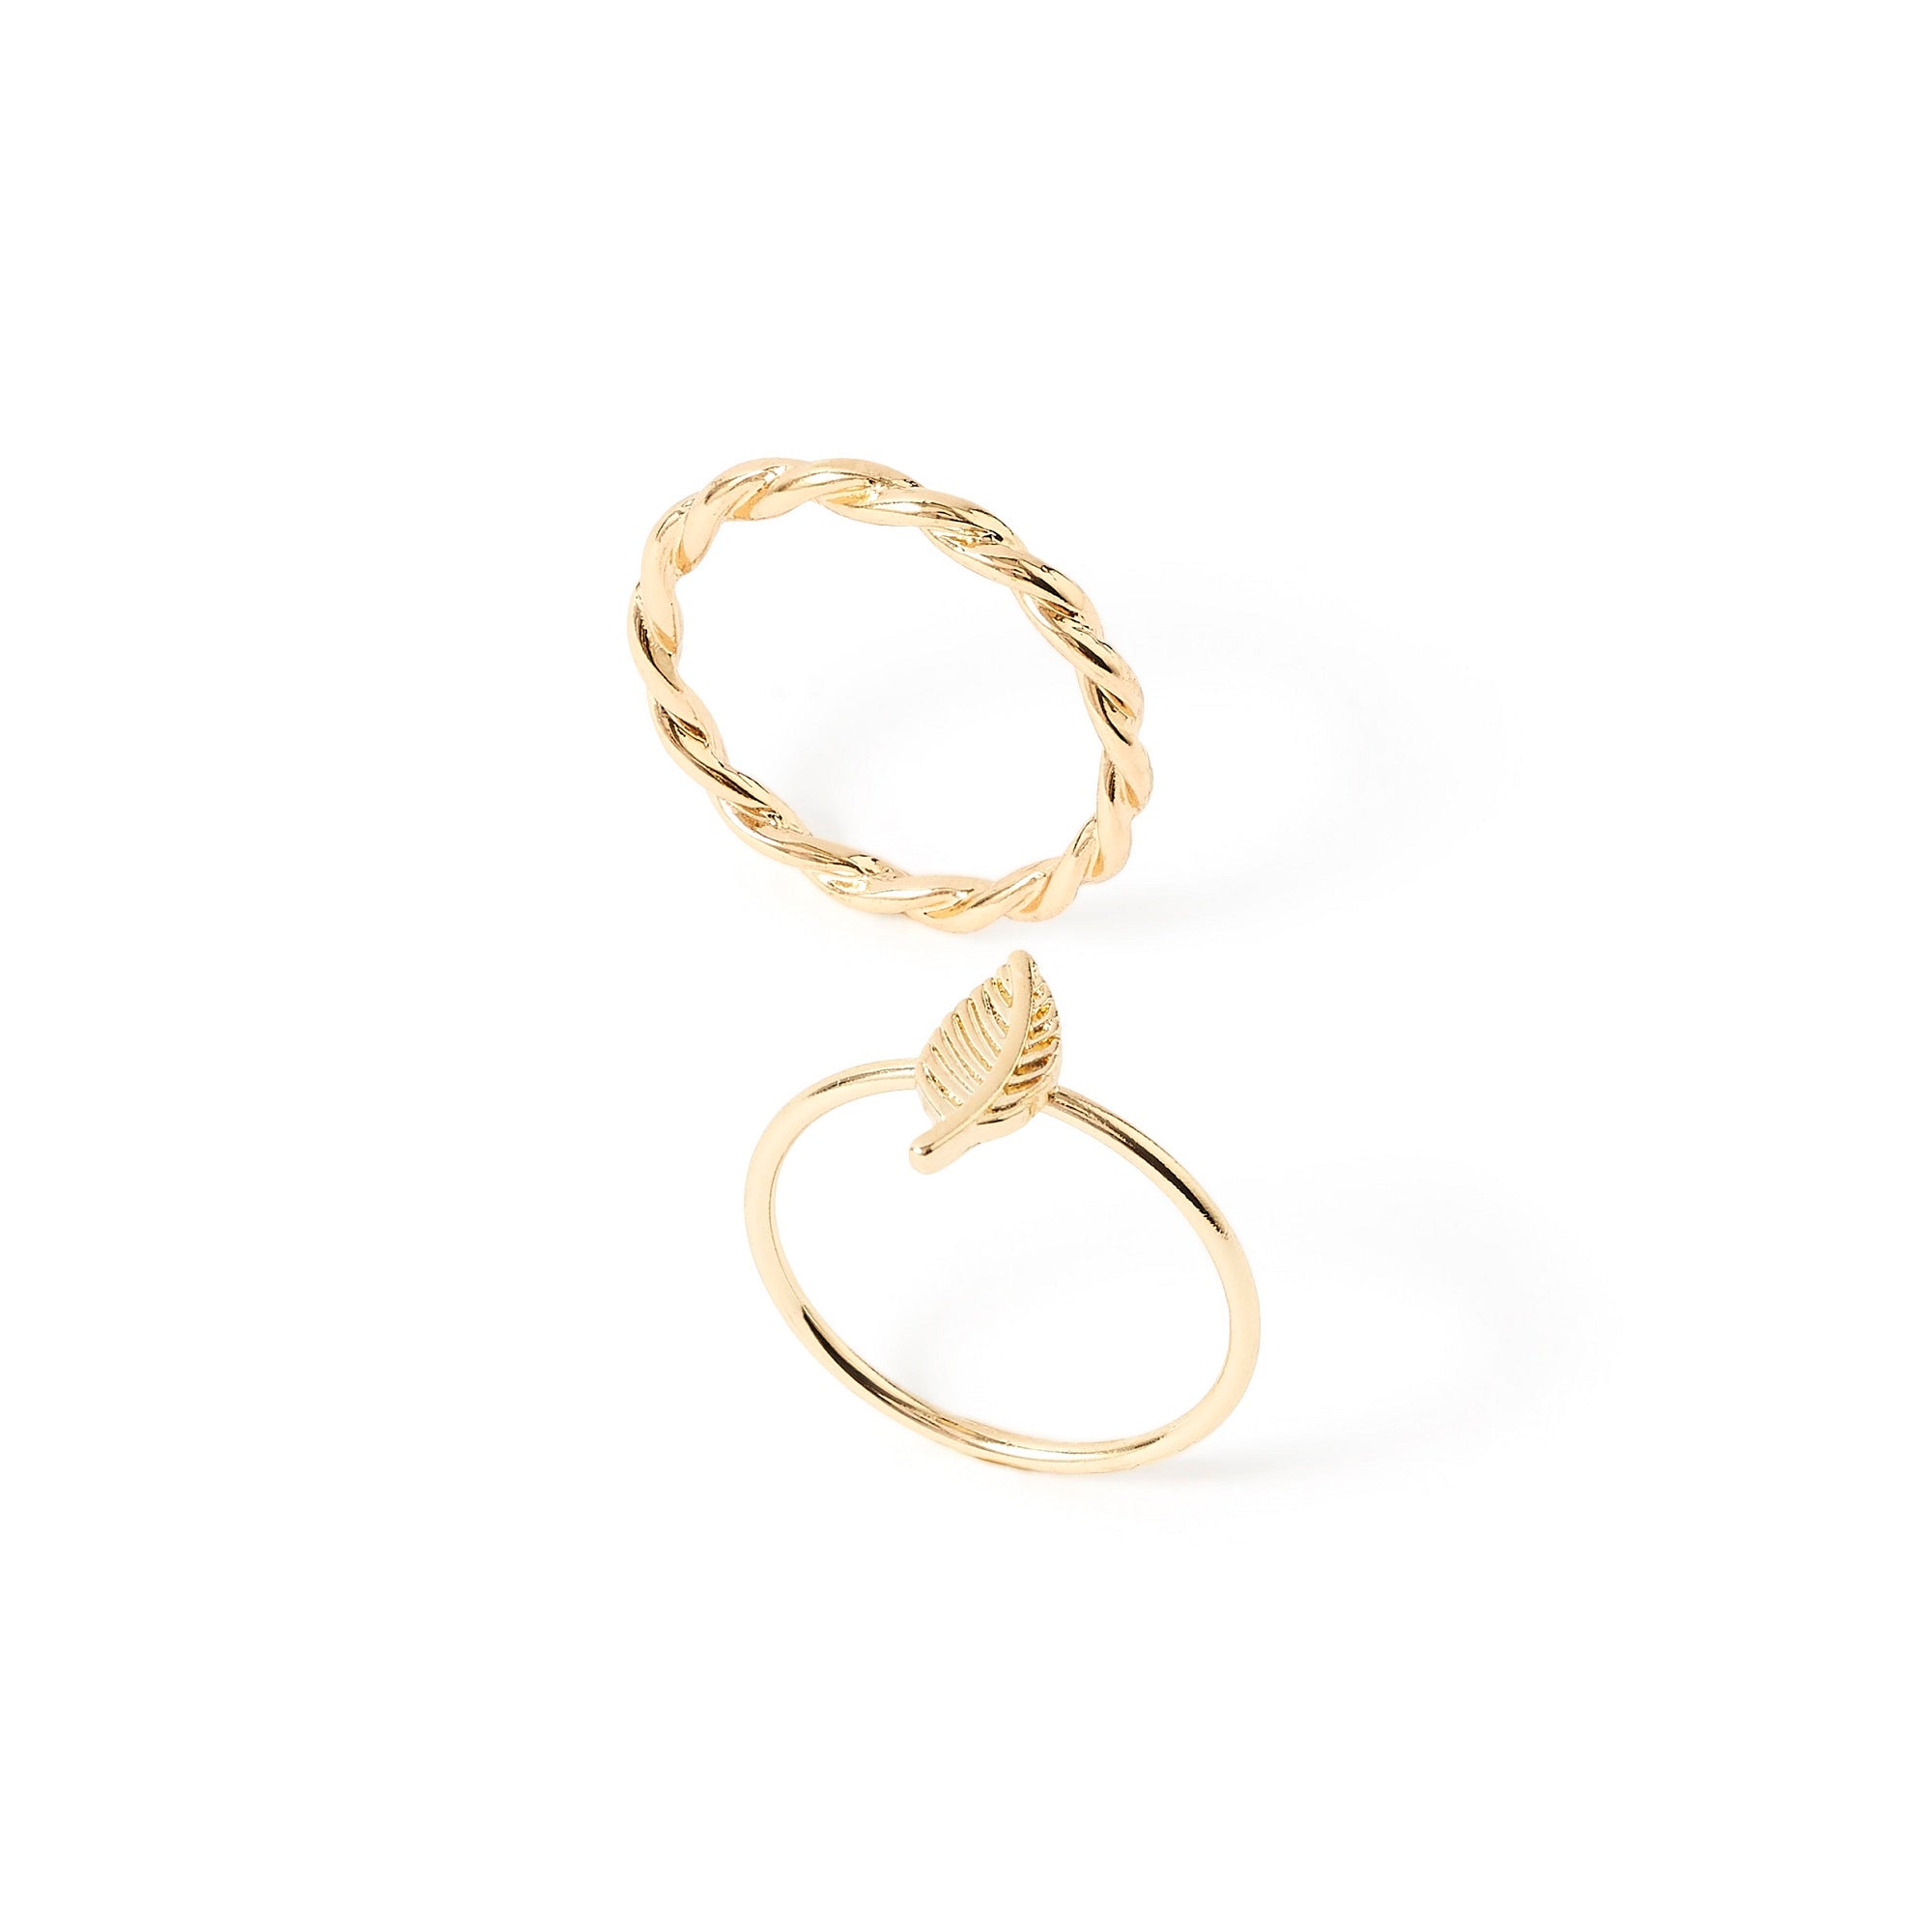 Accessorize London Women's Gold Set of 2 Leaf Twist Band Ring-Small